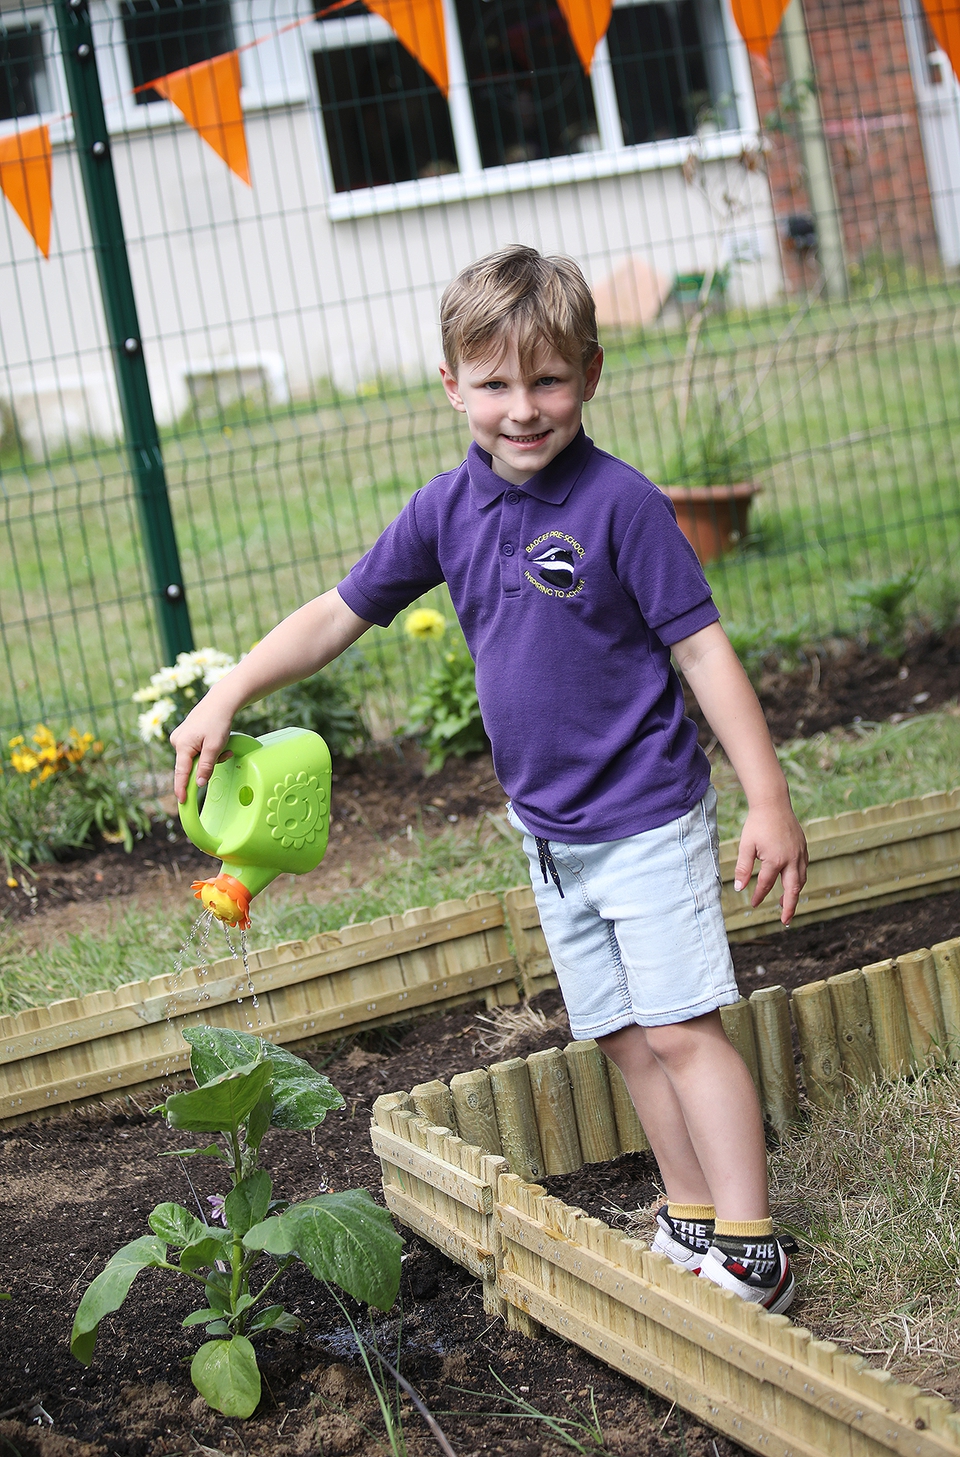 Fray Colborn, aged 4, from Badger Pre-School in Gosport, enjoys watering the flowers in the allotment space outside St Matthew’s Church, Bridgemary